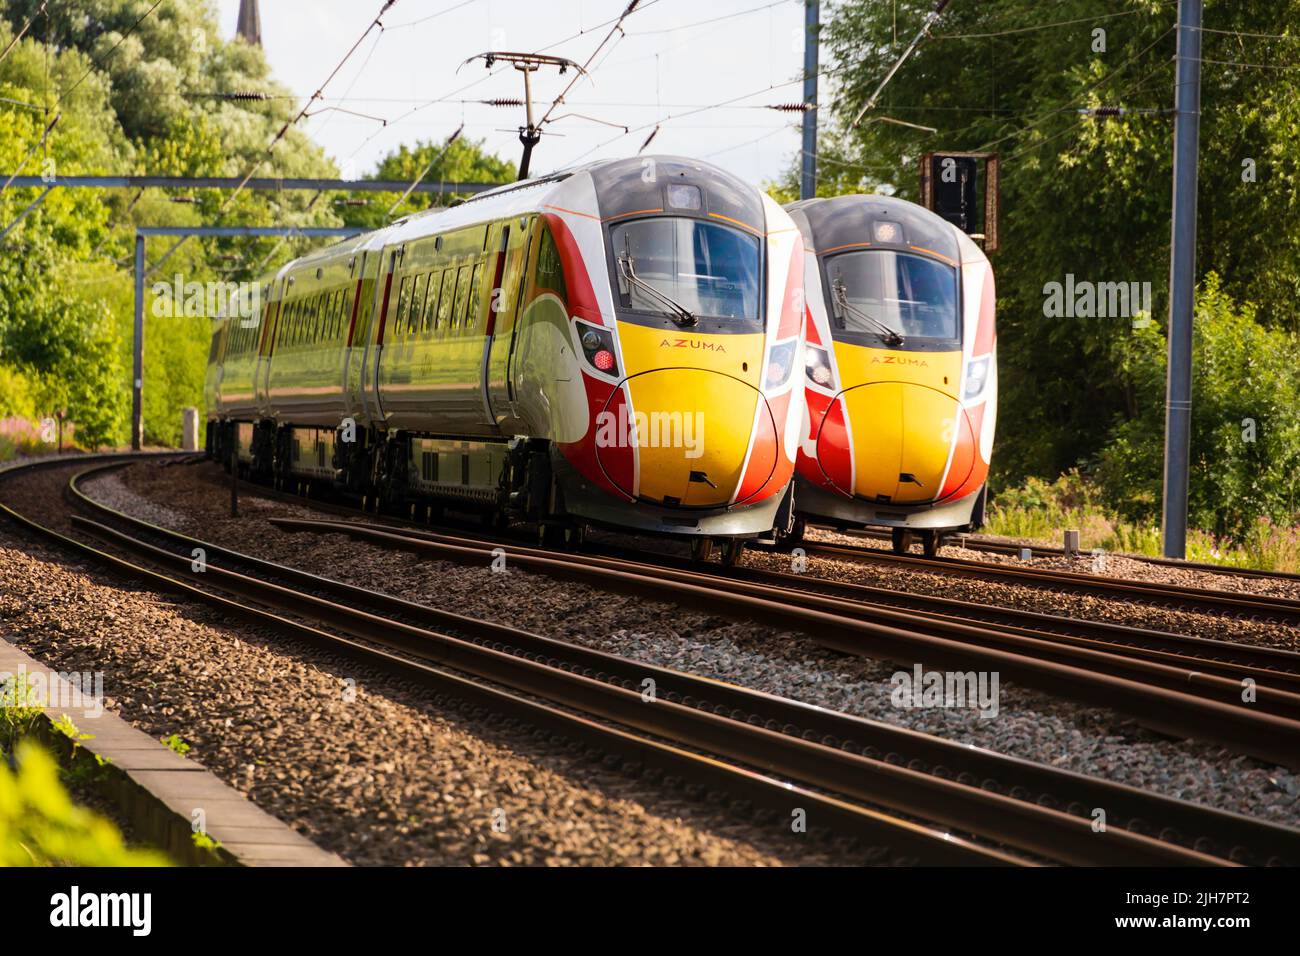 Two London North Eastern Railways 'Azuma' diesel electric hybrid trains pass each other on the East Coast Main line at Offord Cluny, Cambridgeshire, E Stock Photo